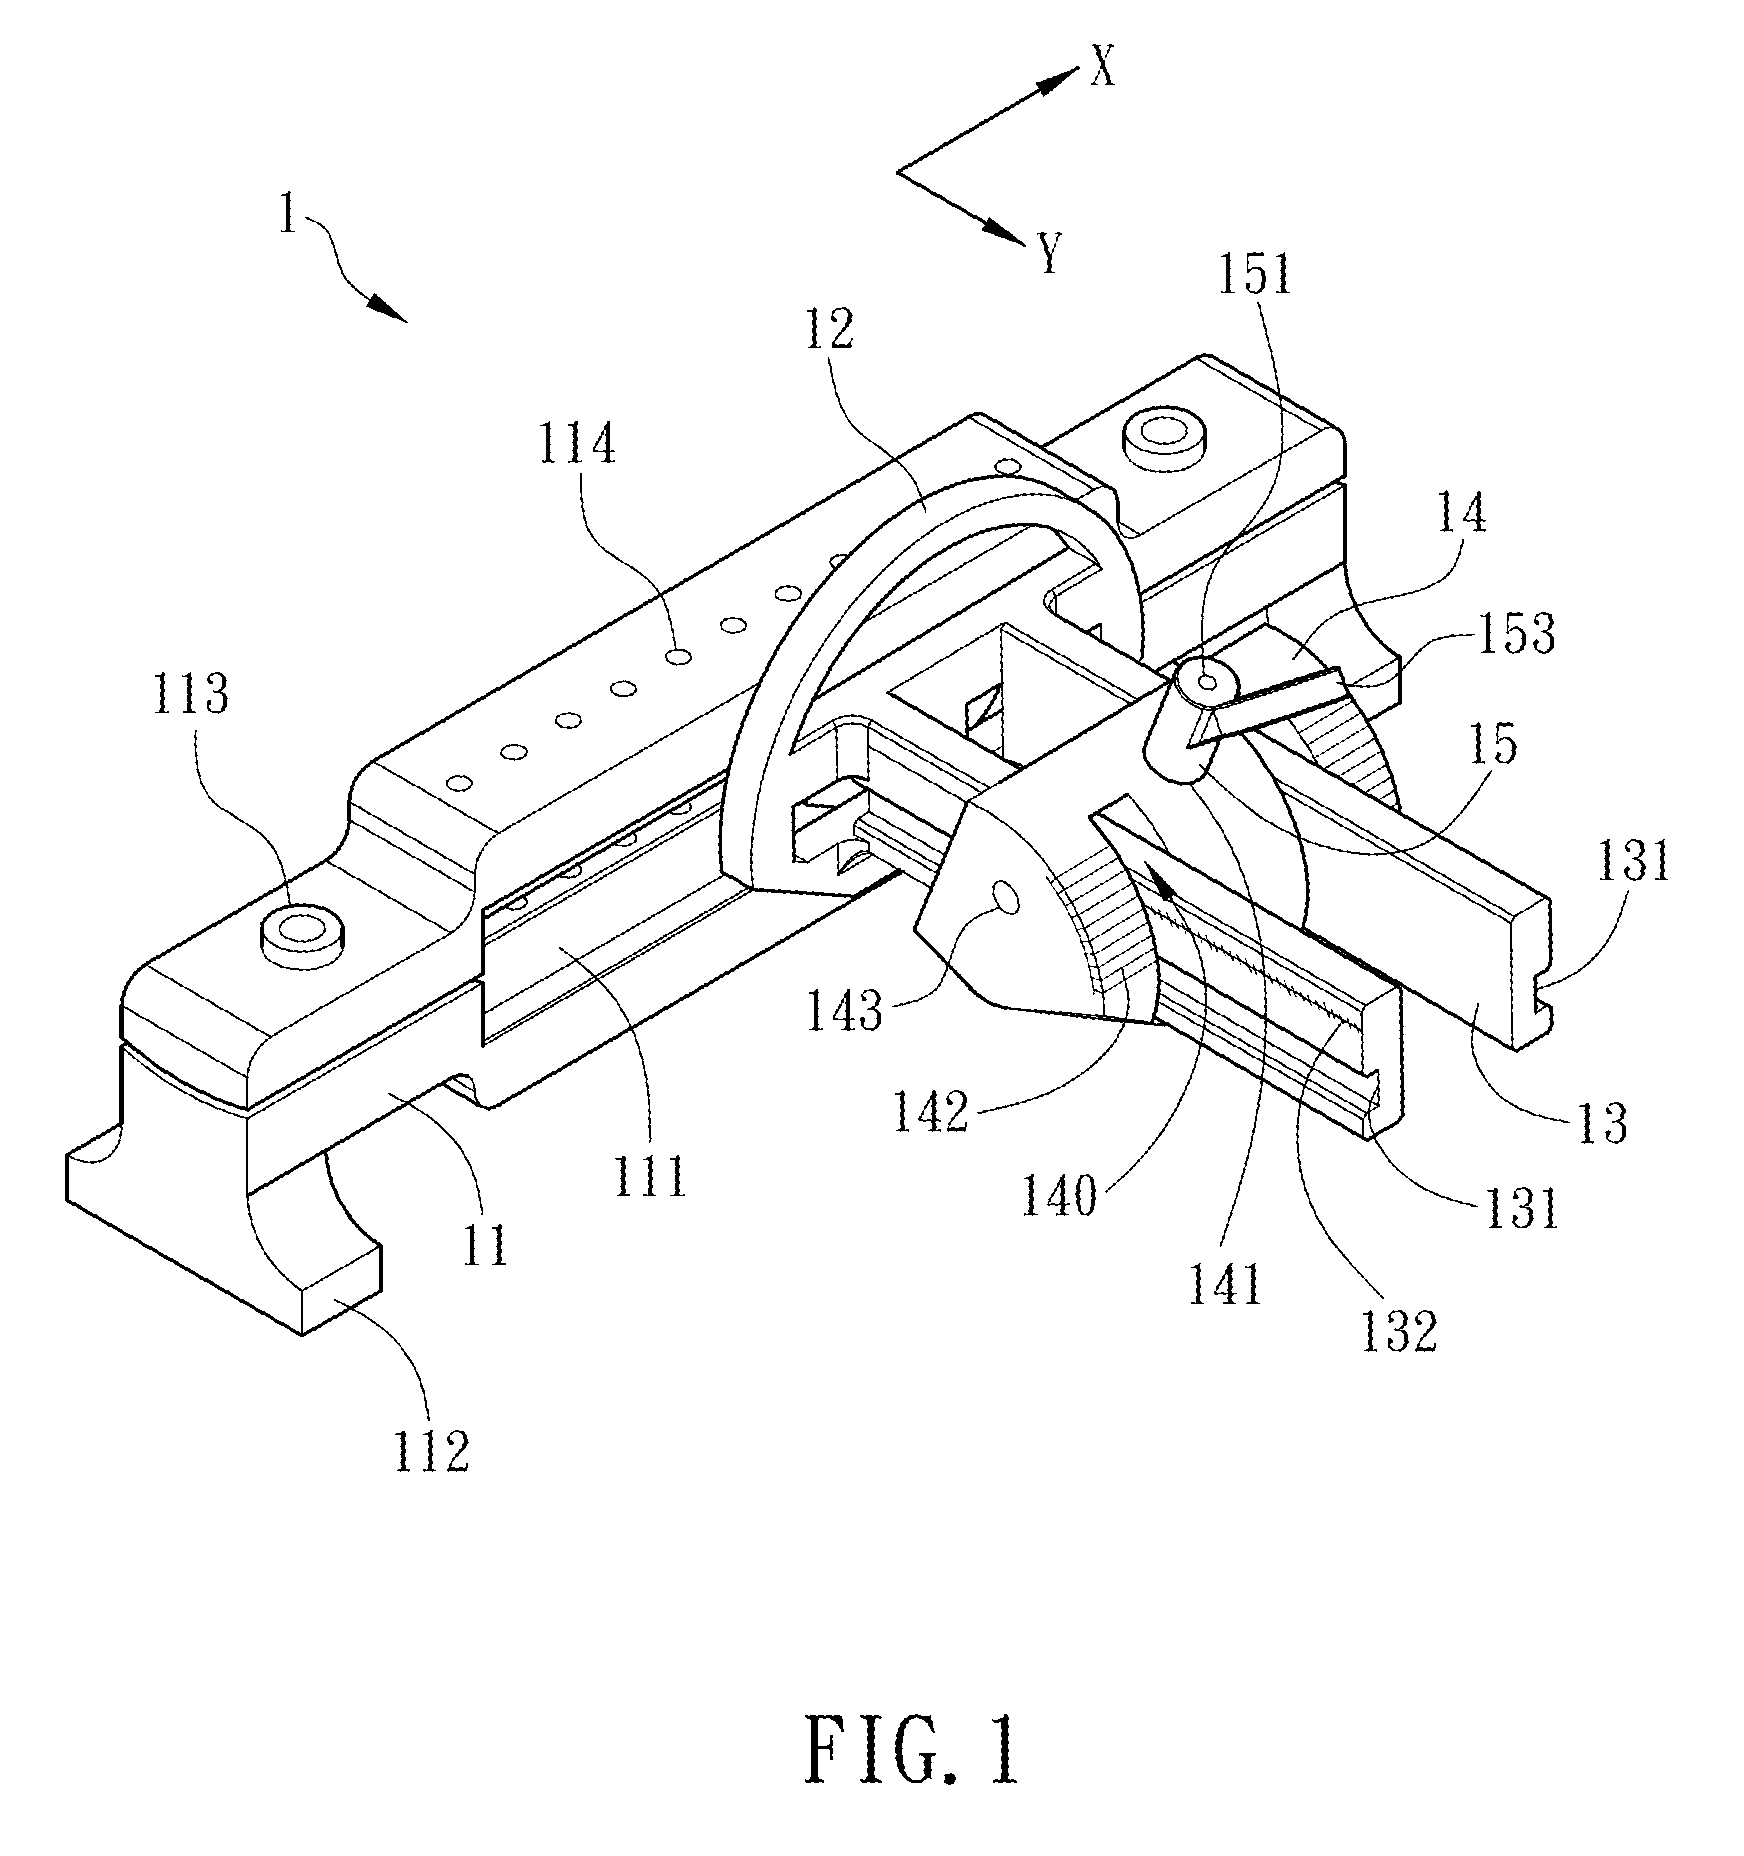 Assistant device and guiding assembly for percutaneous surgery